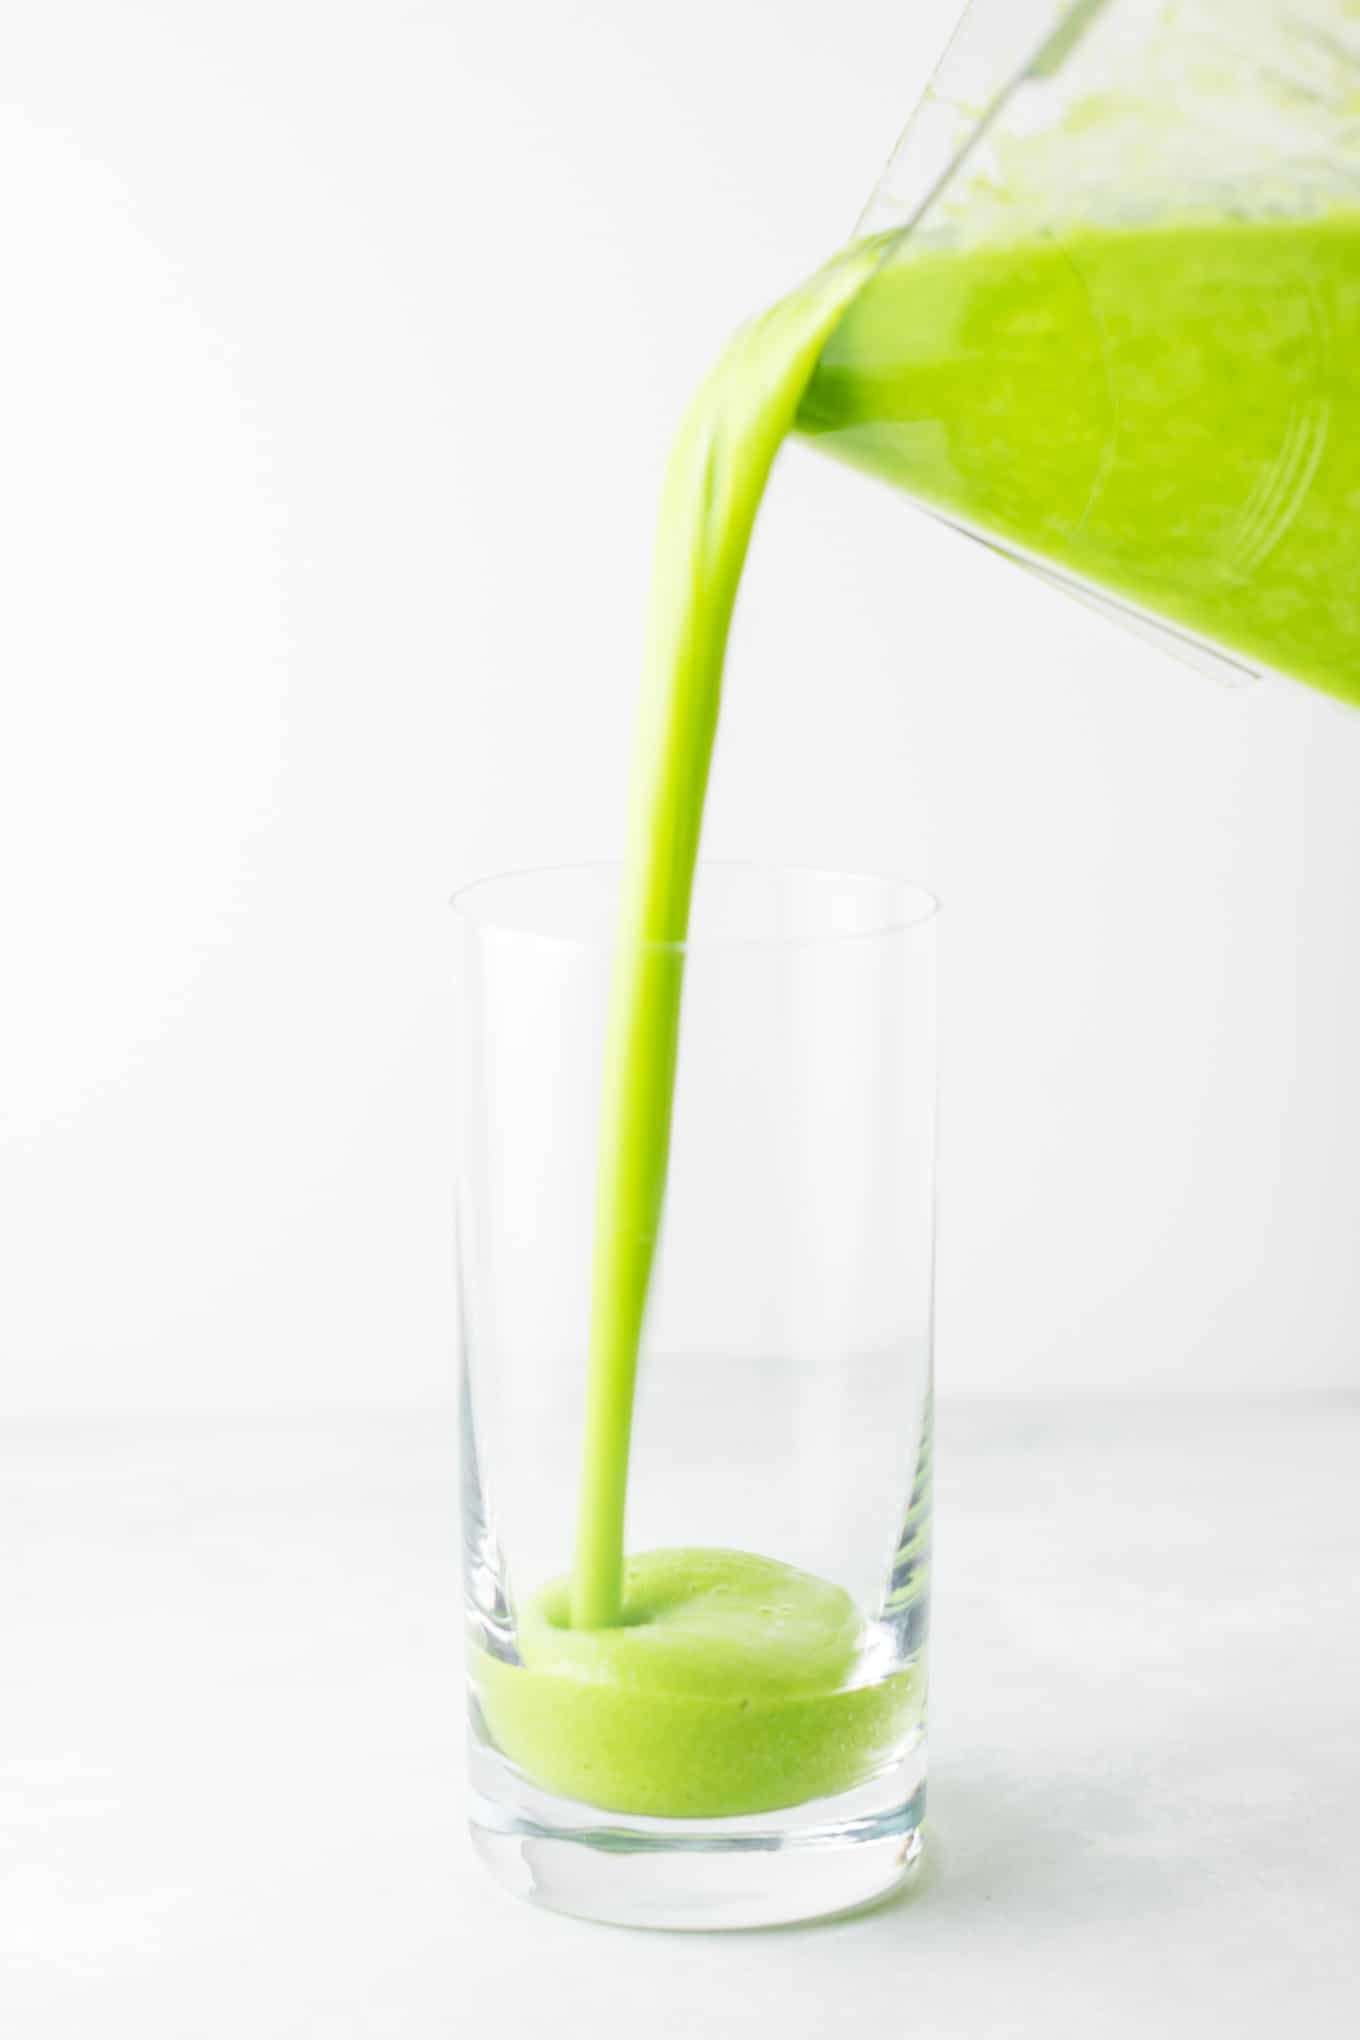 pouring the green smoothie into a glass